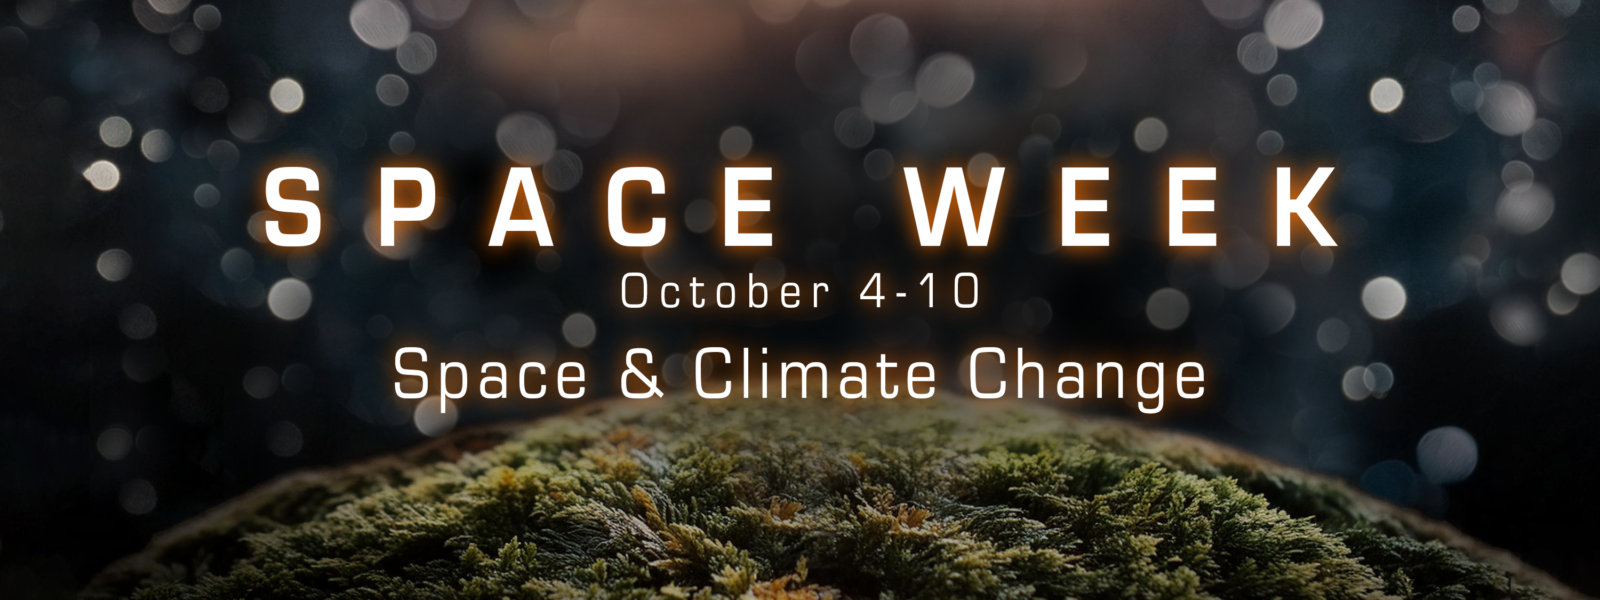 An image of a moss covered globe with out of focus stars behind it. The image could be perceived as rain falling on a mossy stone, or a moss covered planet floating in space. The text reads: Space Week October 4-10: Space and Climate Change